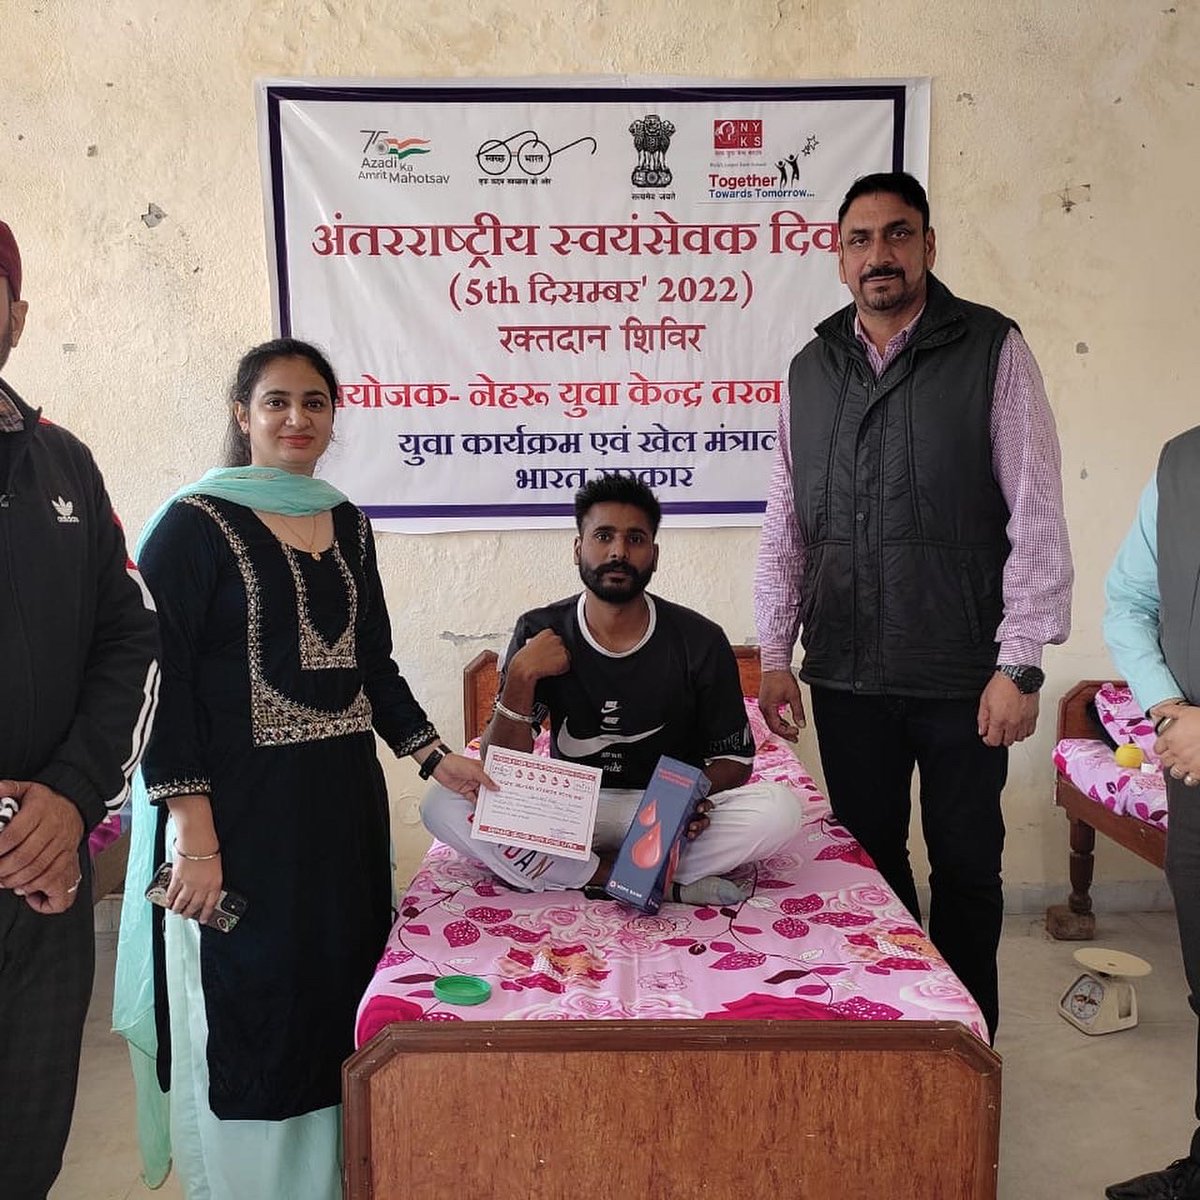 On the occasion of #InternationalVolunteerDay, @YuvaTarn organized a blood donation camp in which volunteers and club members participated.

#IVD2022 #Blood4Life #VolunteersDay #NYKSVolunteers